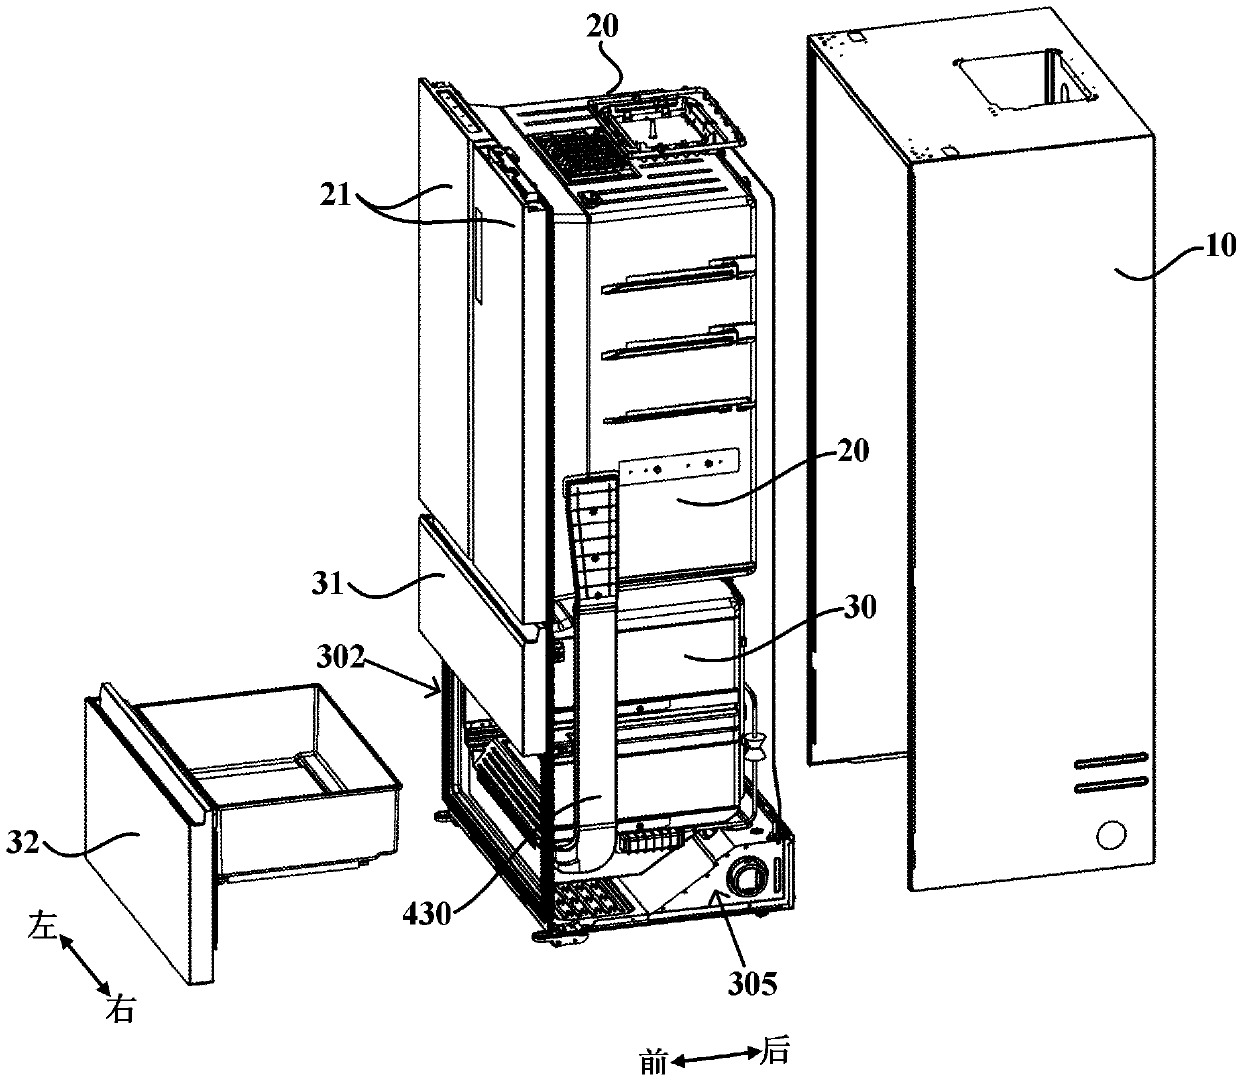 Refrigerator capable of dissipating heat from bottom